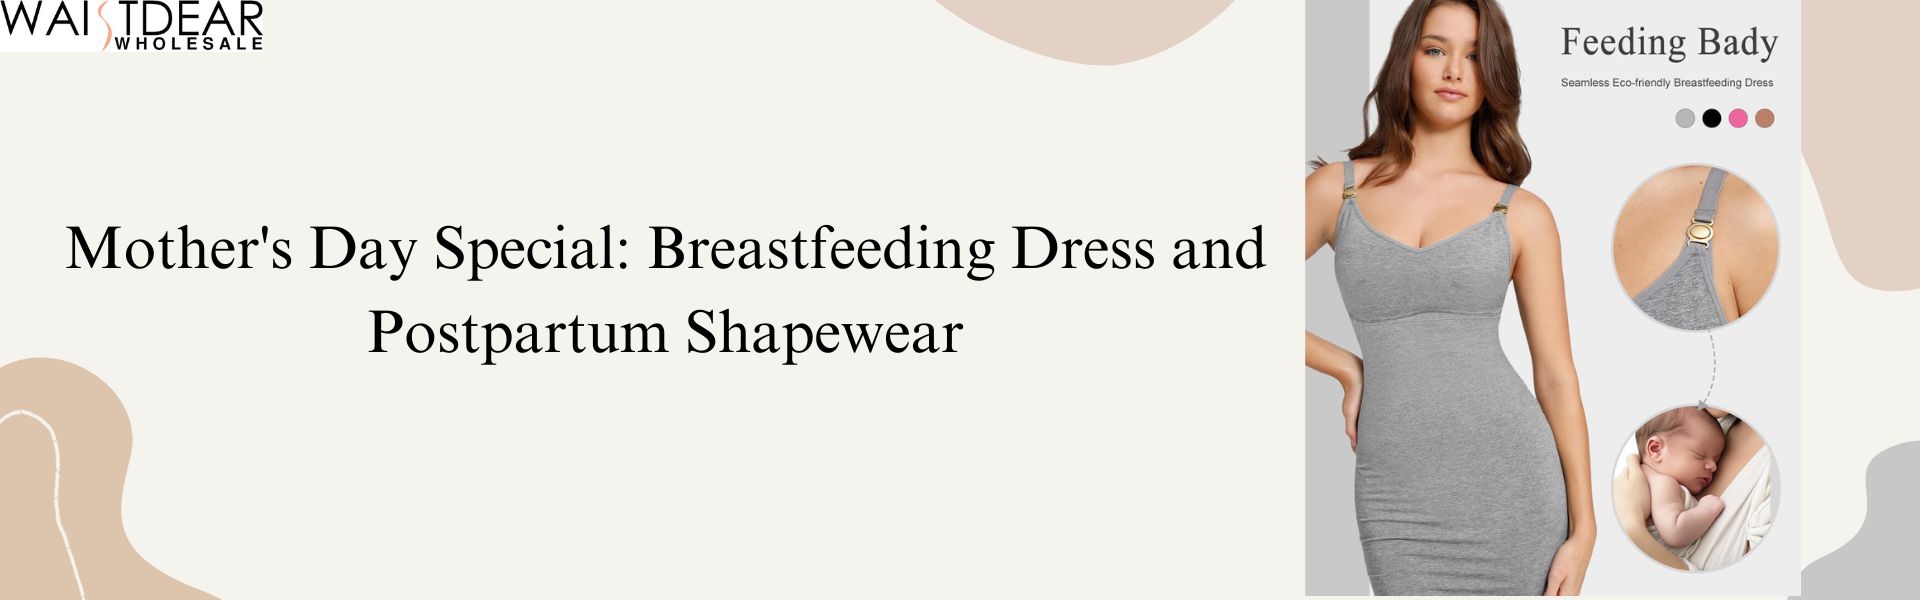 Mother's Day Special: Breastfeeding Dress and Postpartum Shapewear